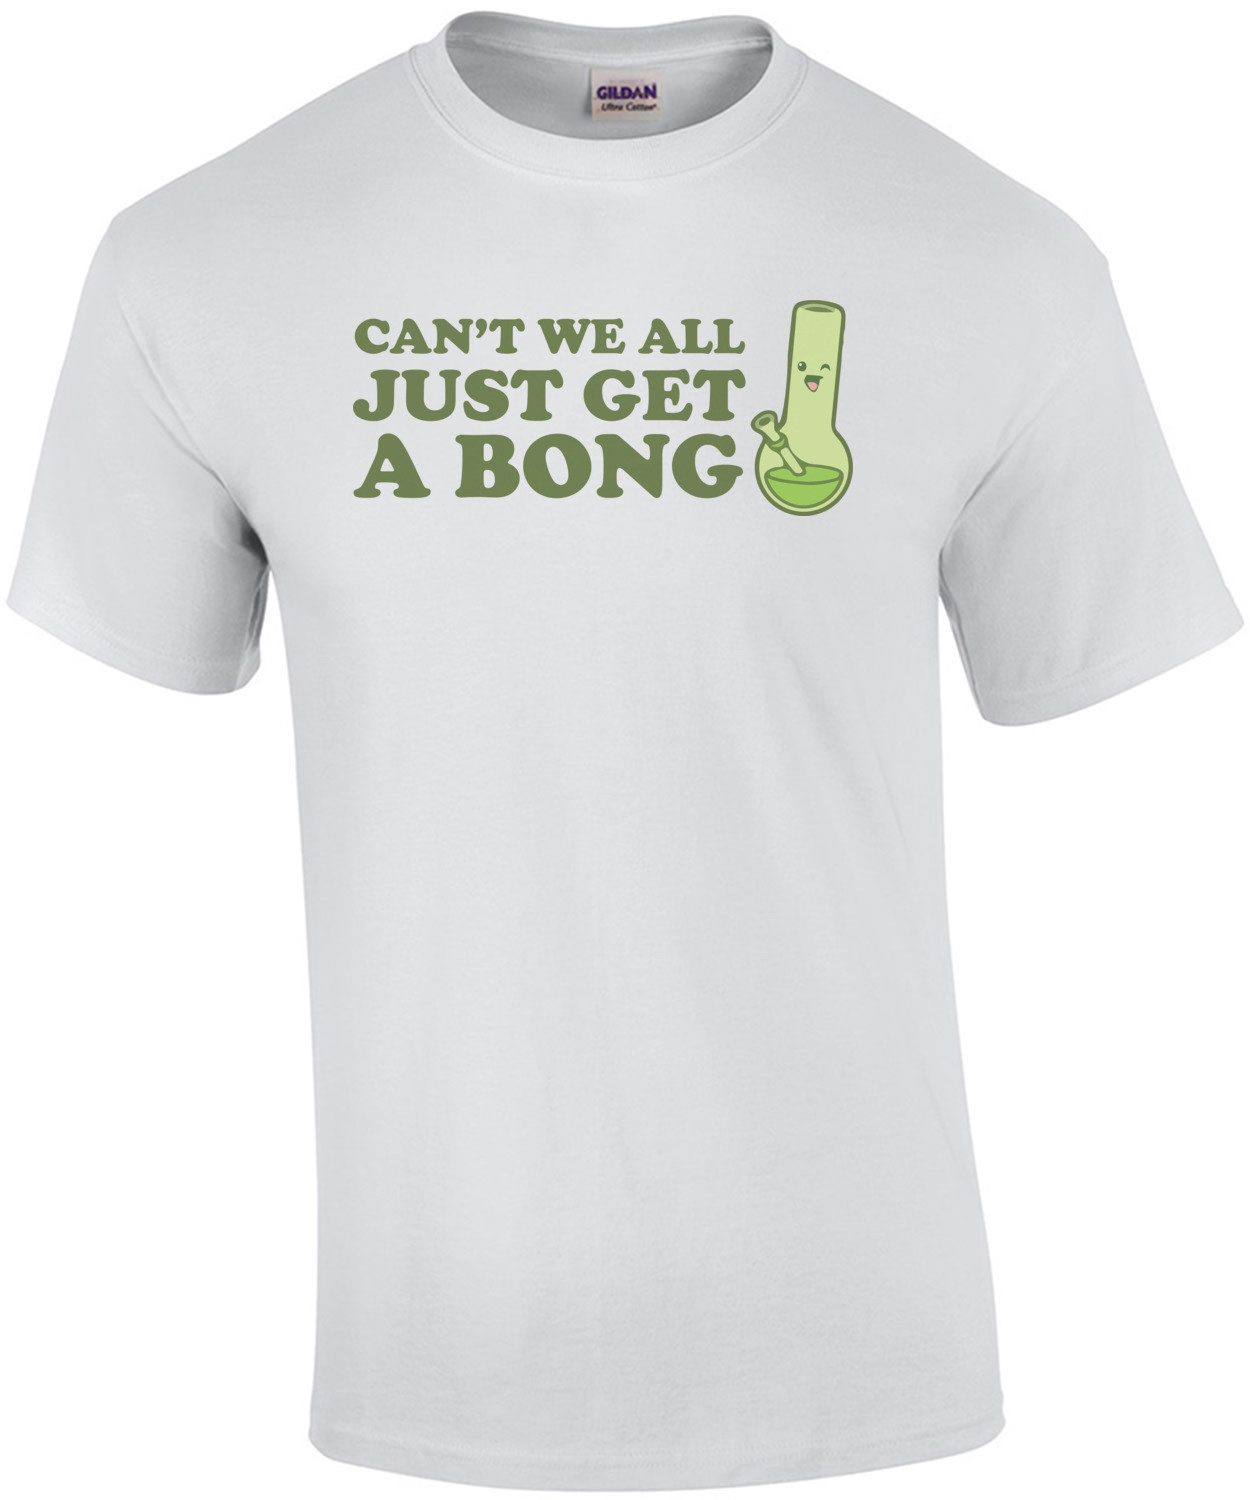 Can't we all just get a bong? Weed T-Shirt